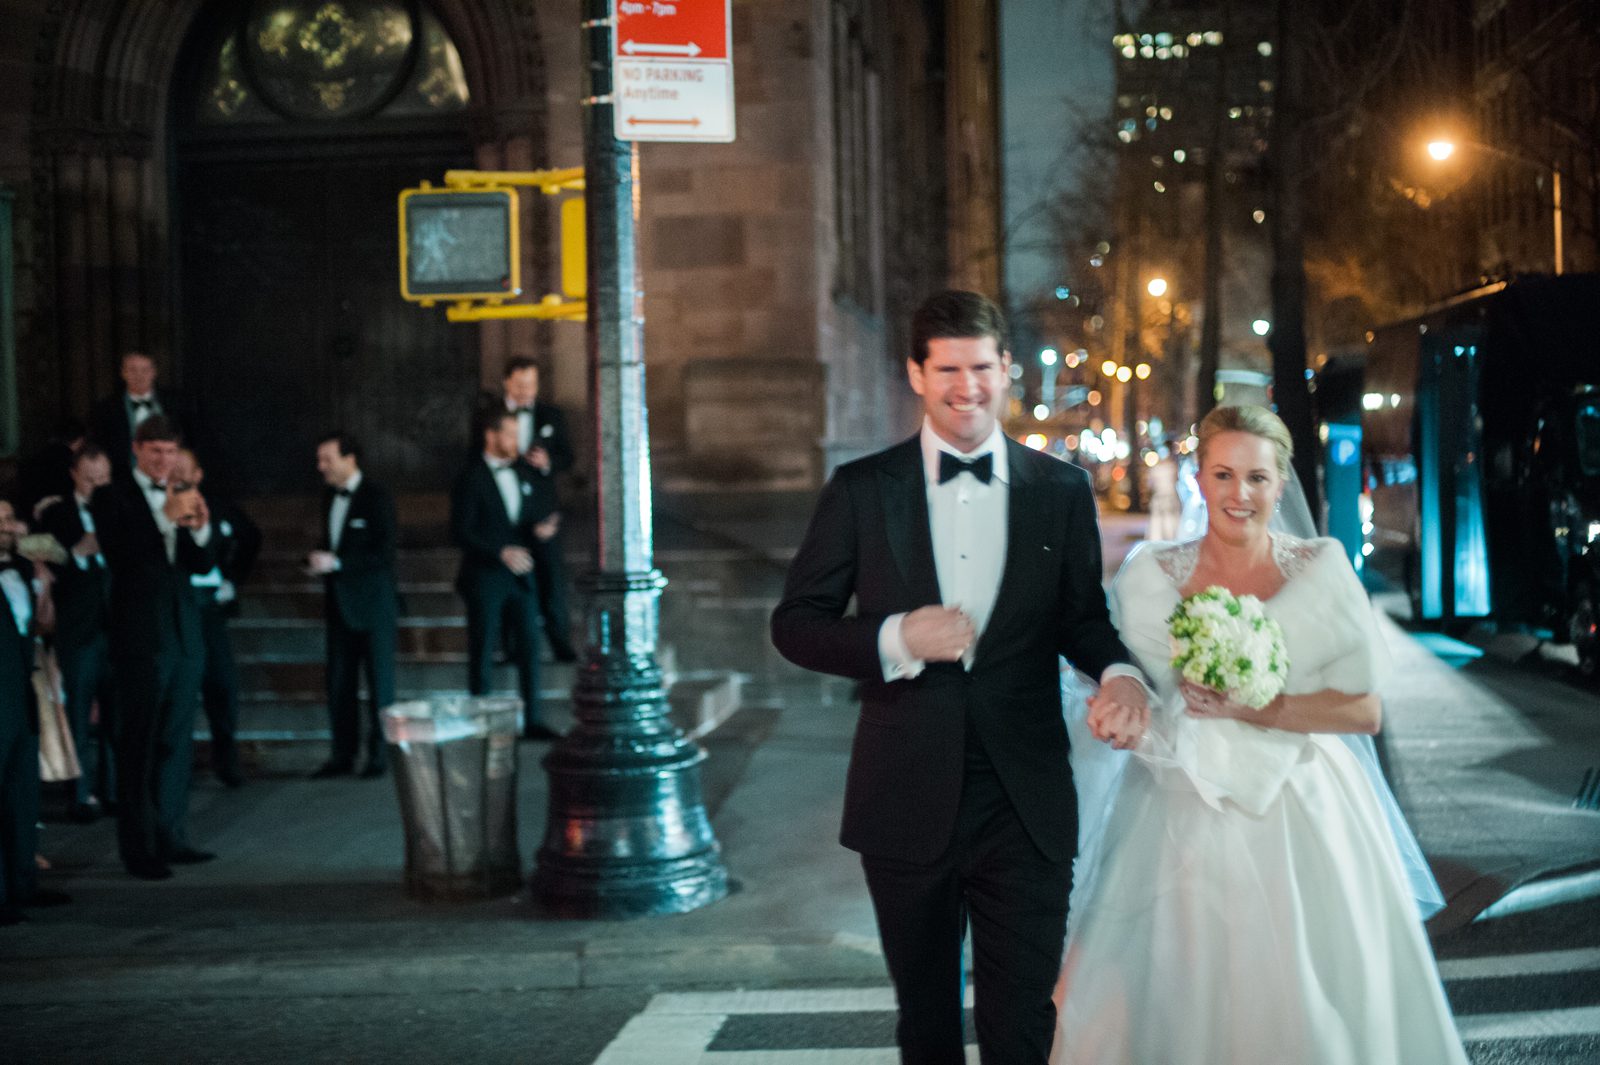 The bride and the groom walking on the street